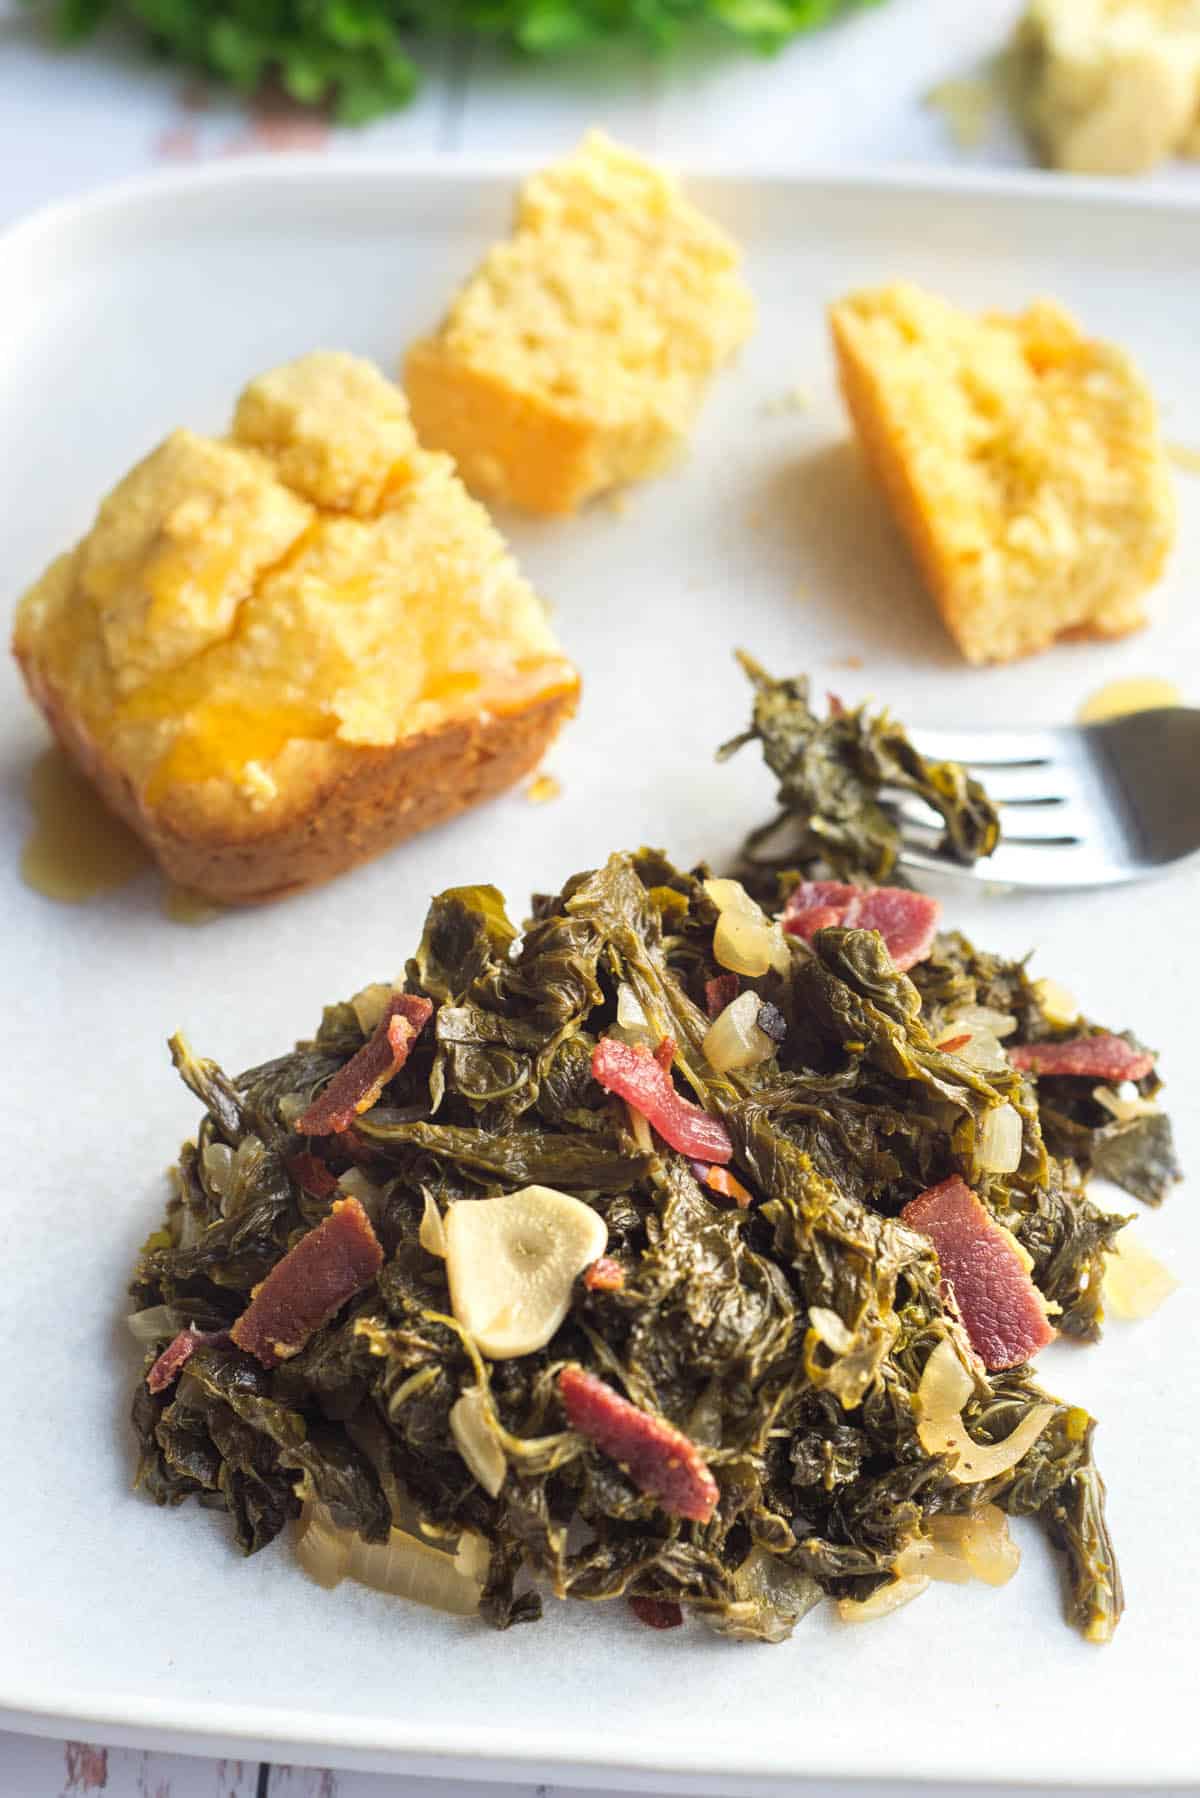 Southern Style Mustard Greens with Crispy Bacon - Tastes Just Like